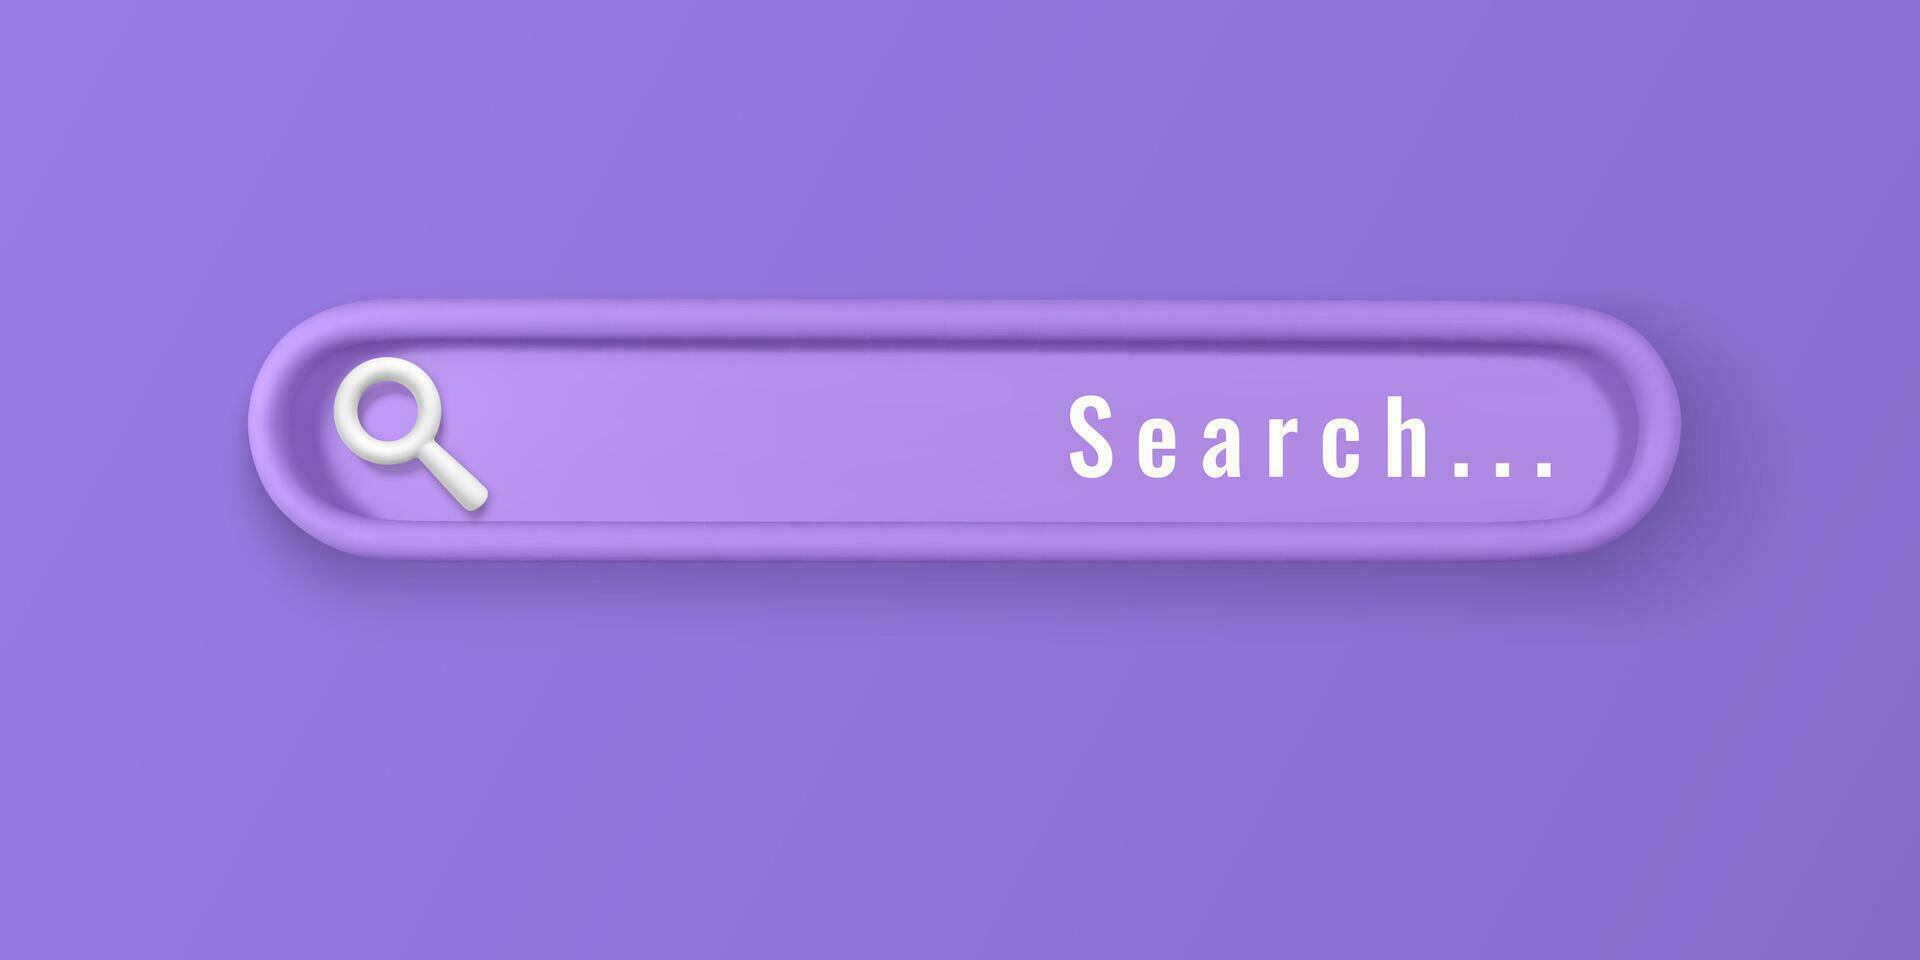 Realistic 3d search bar design element in cartoon minimal style on violet background. Vector illustration